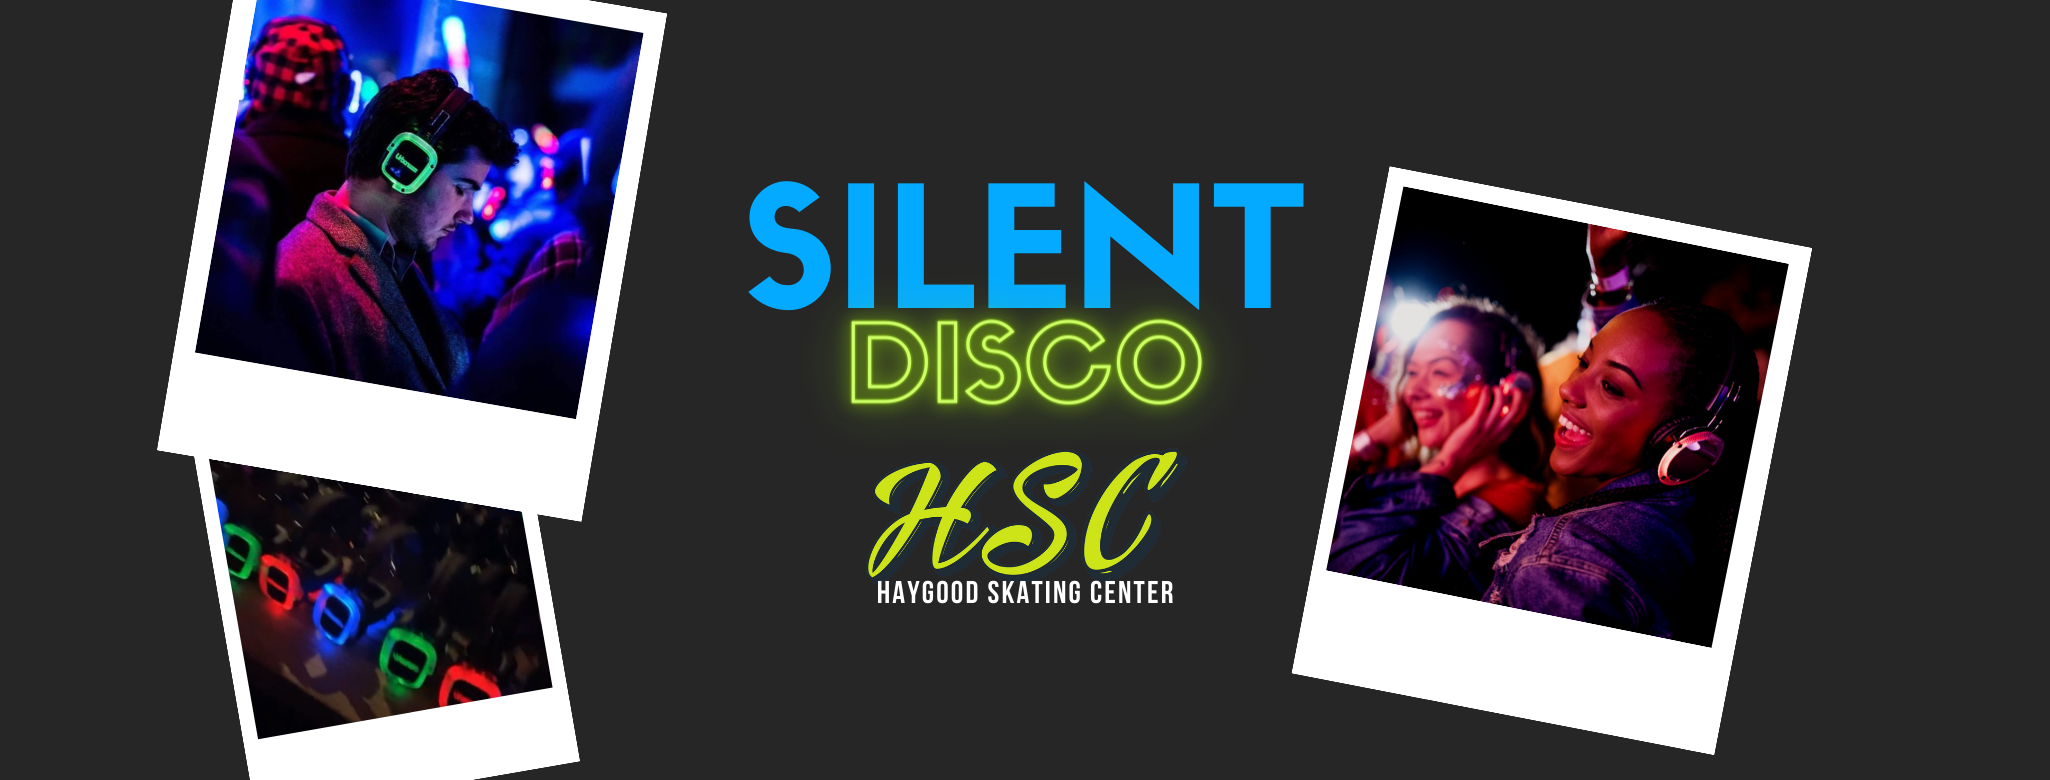 Haygood - Silent Disco Cover Photo